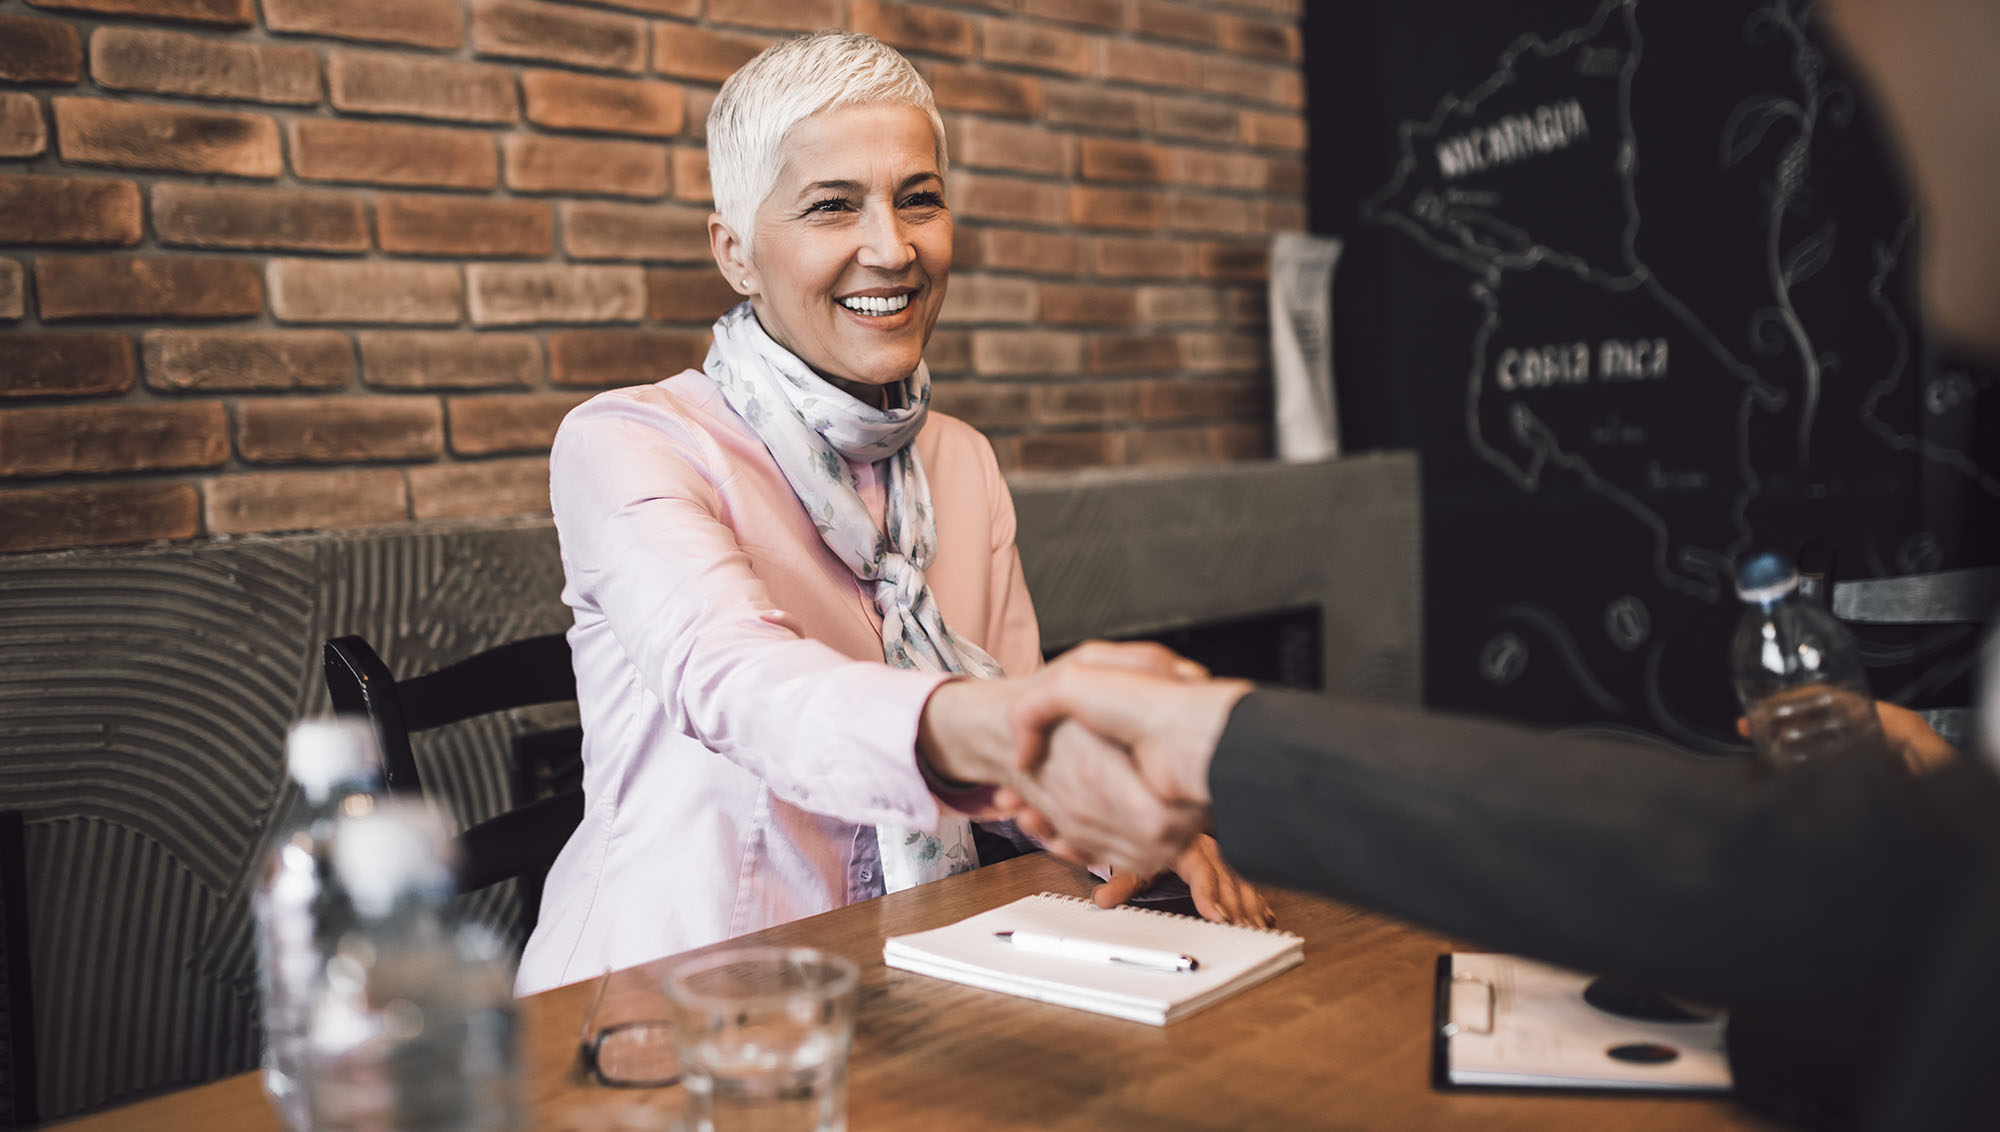 Woman shaking hands and accepting job offer